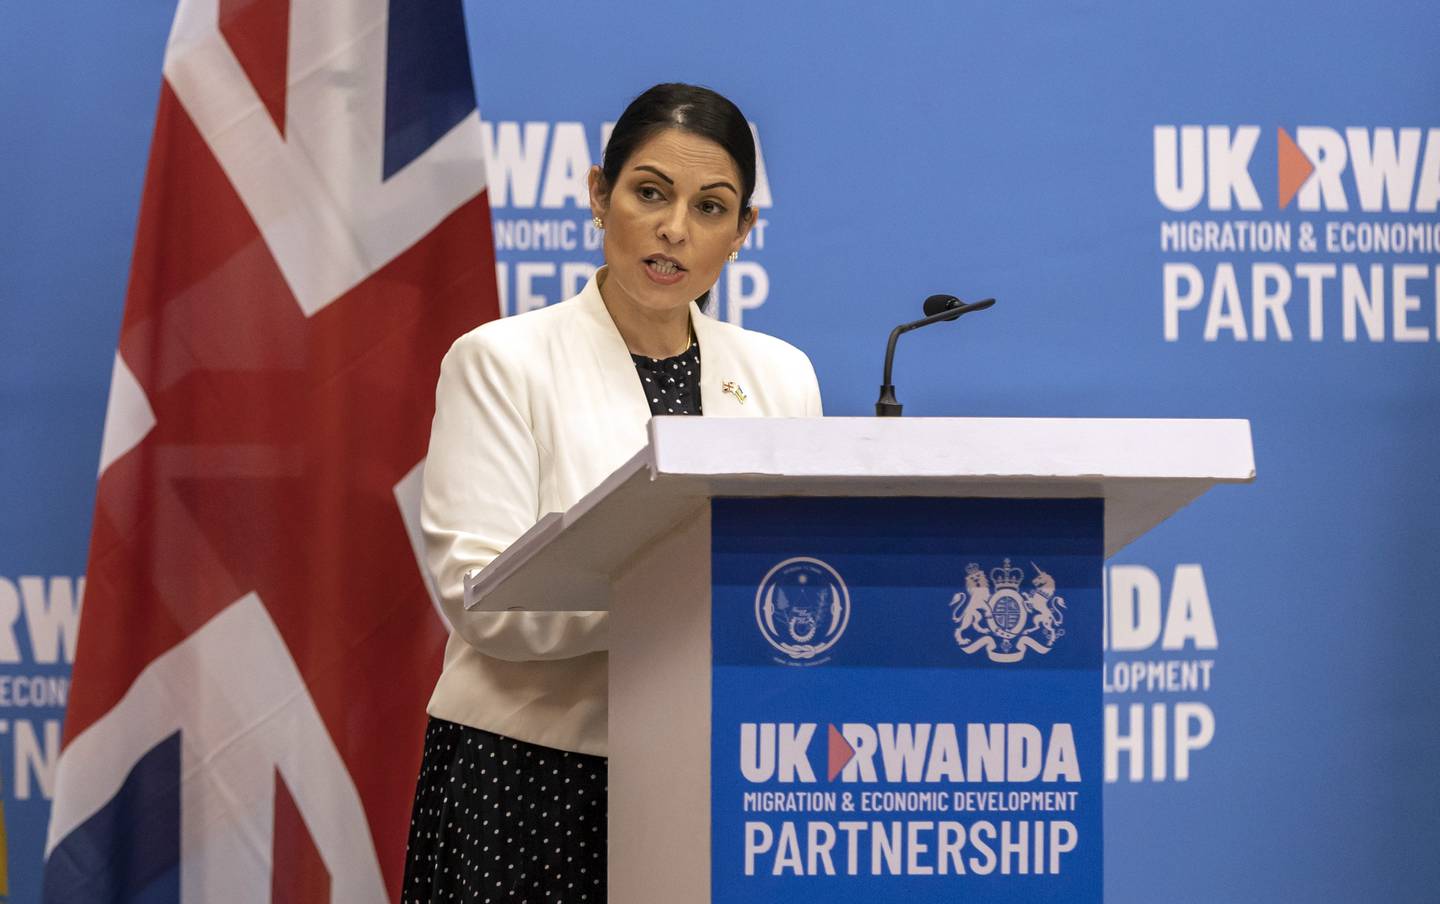 Britain's Home Secretary Priti Patel speaks to the media after signing what the two countries called an "economic development partnership" in Kigali, Rwanda. AP Photo